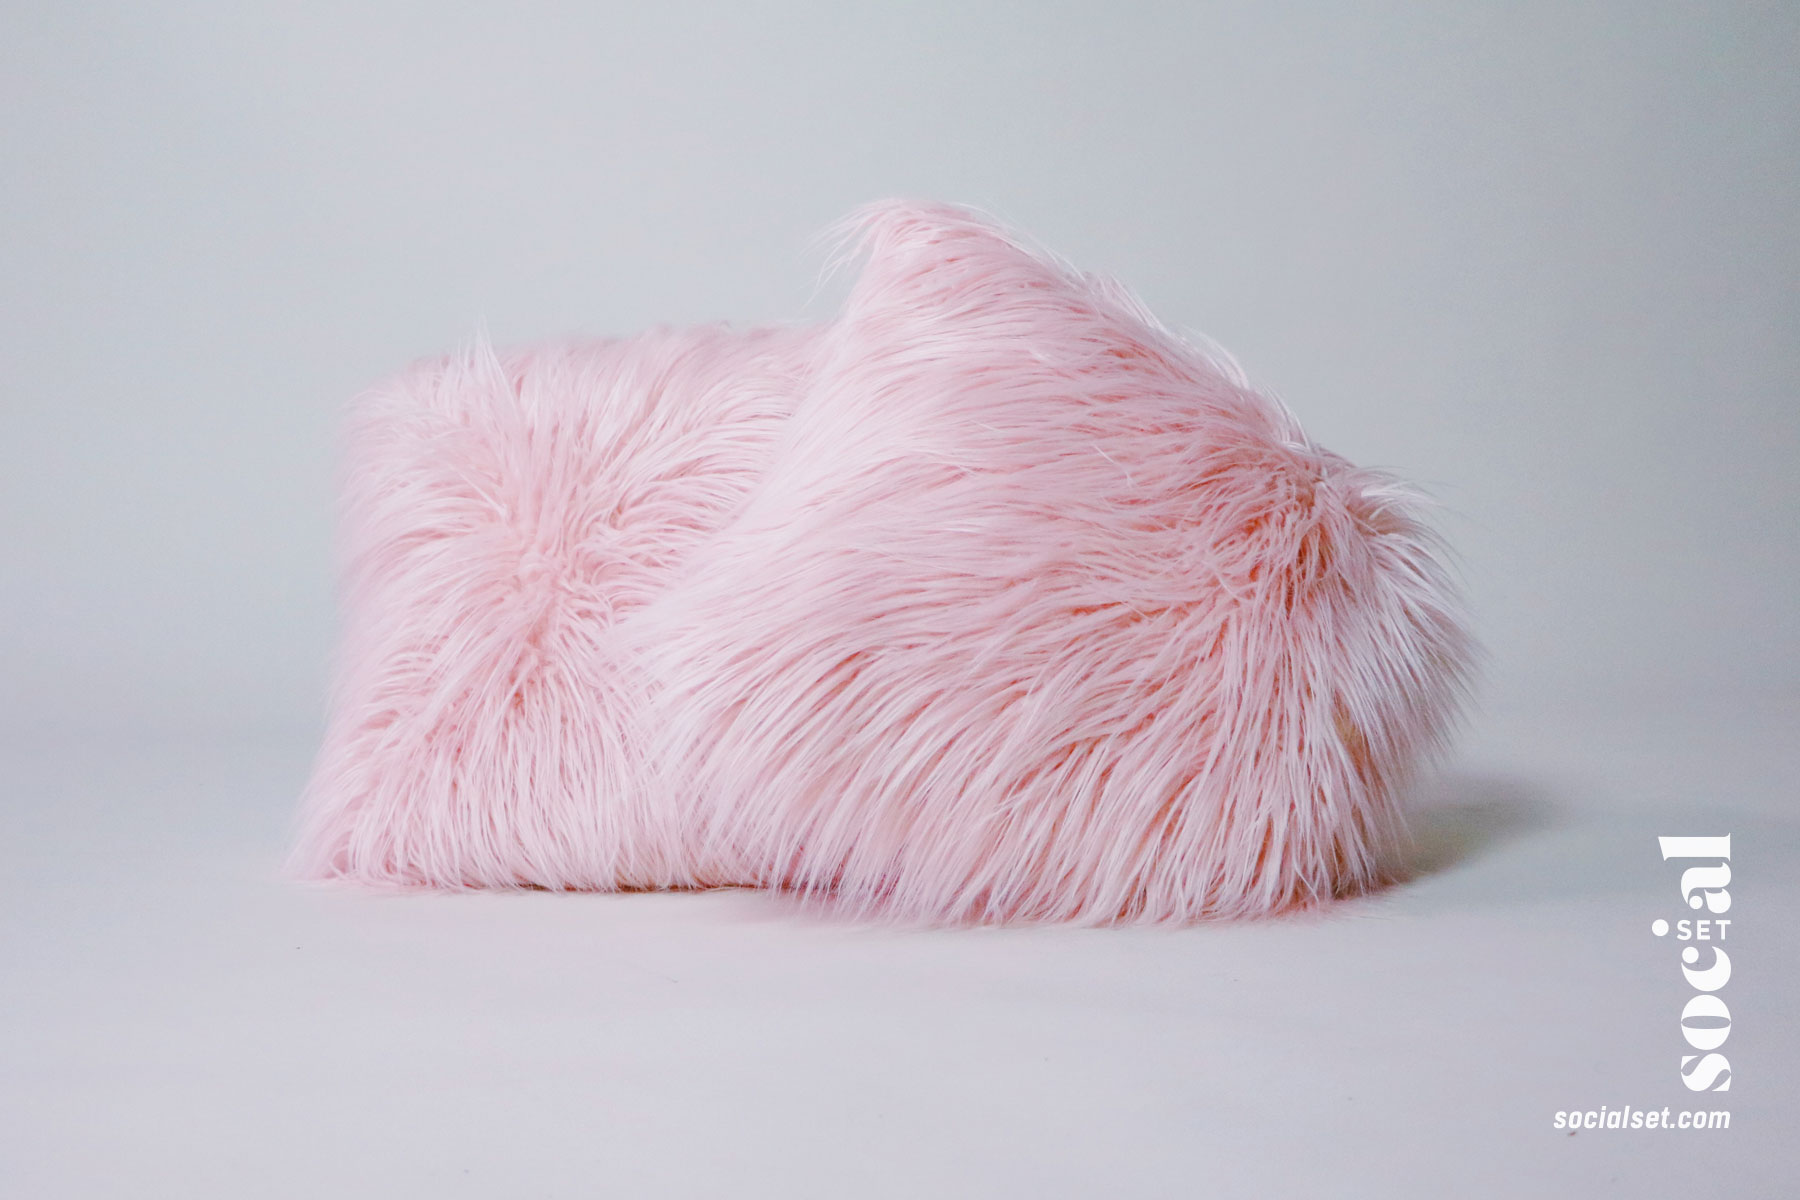 Fuzzy Pink Pillow Props